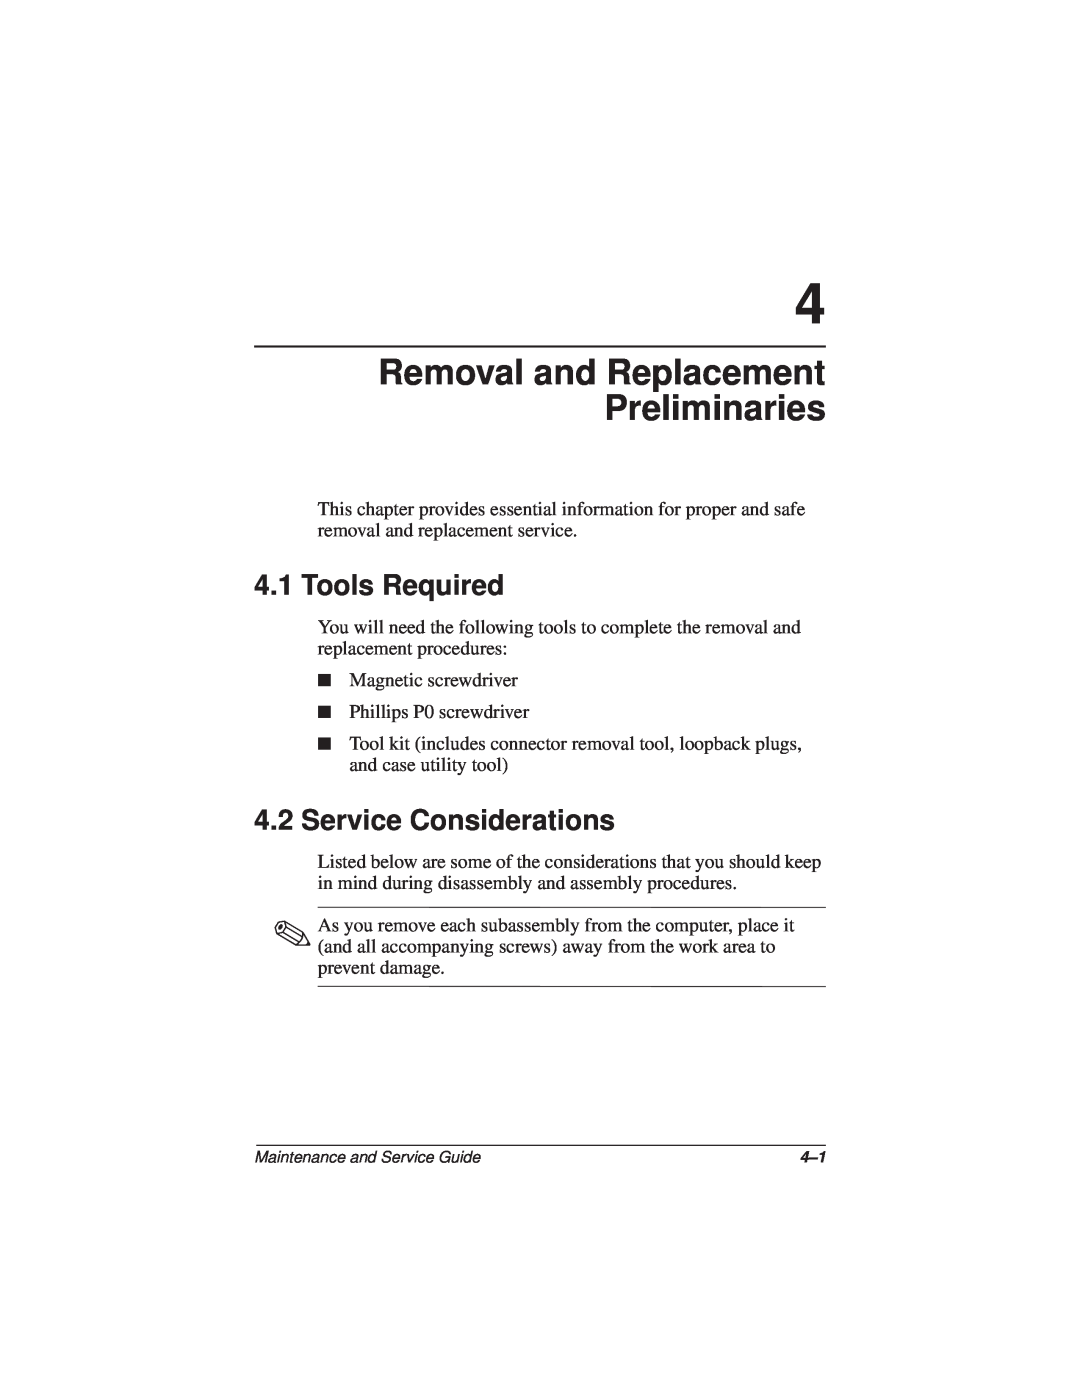 Compaq N110 manual Removal and Replacement Preliminaries, Tools Required, Service Considerations 